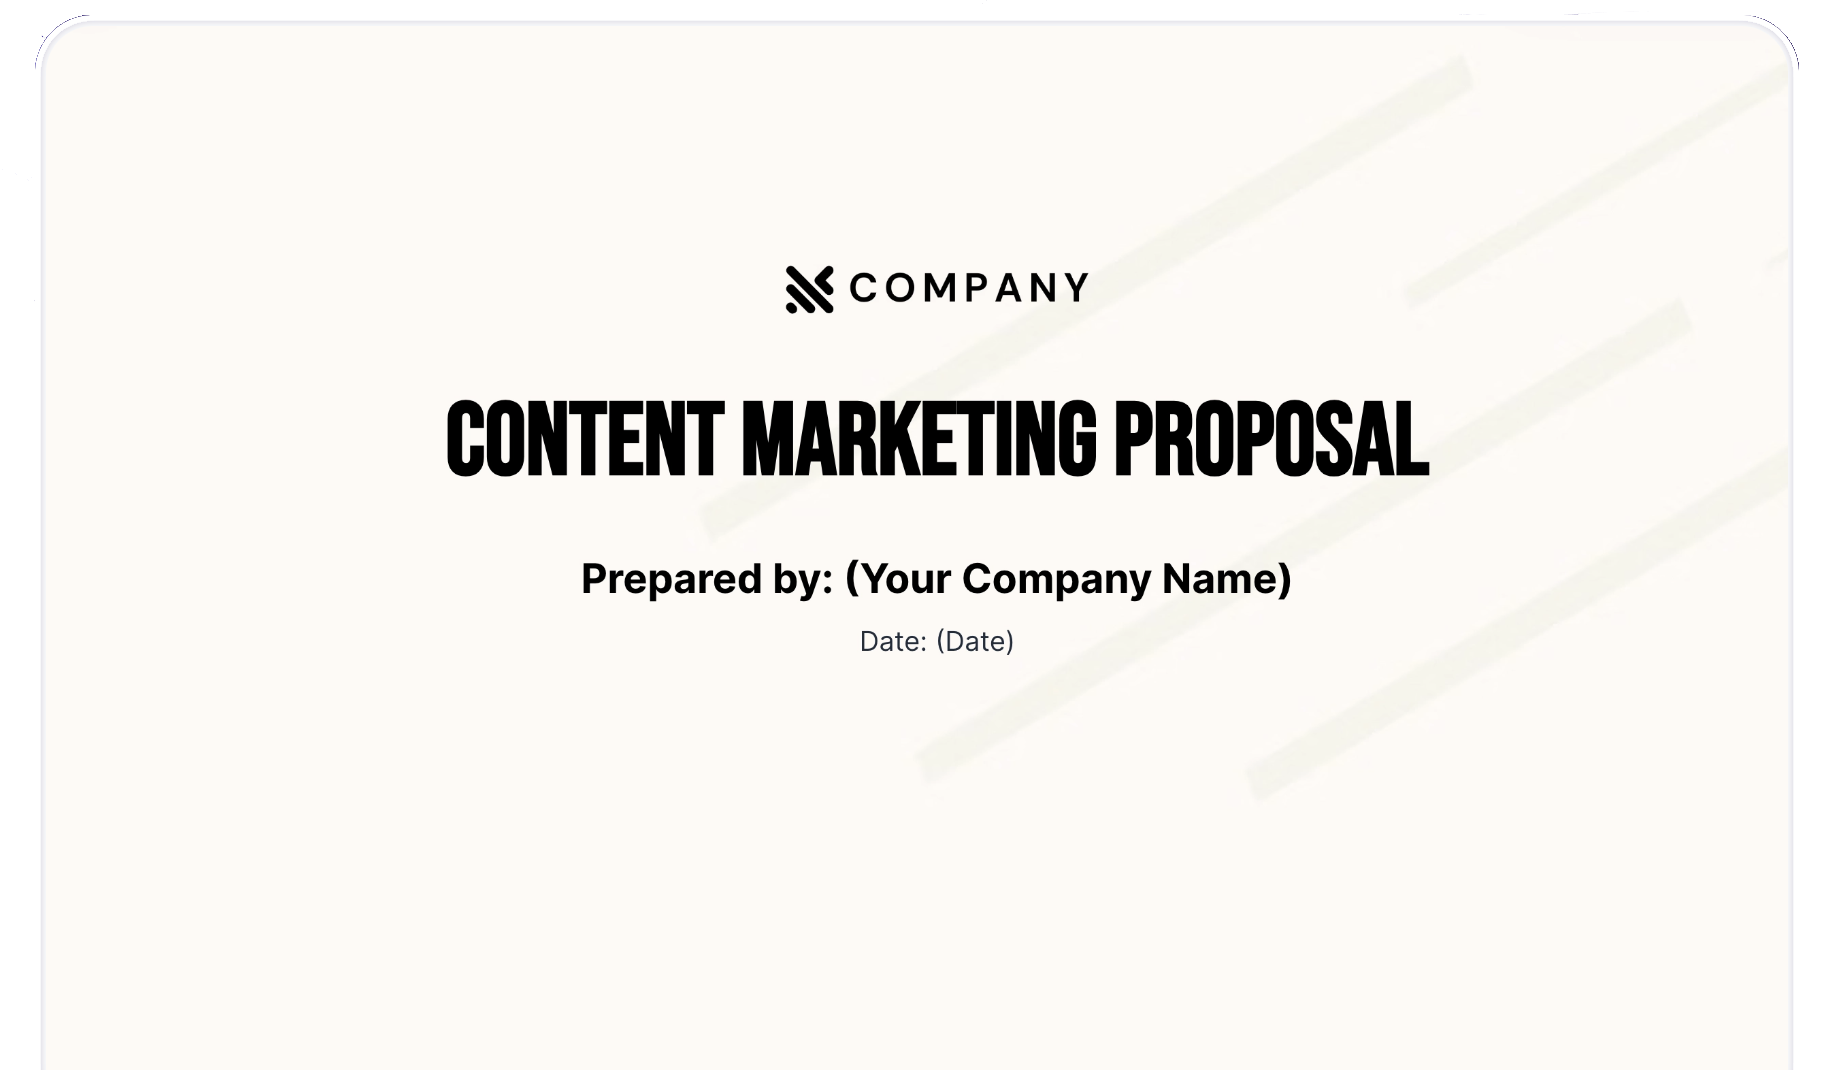 a content marketing proposal is prepared by your company name and date